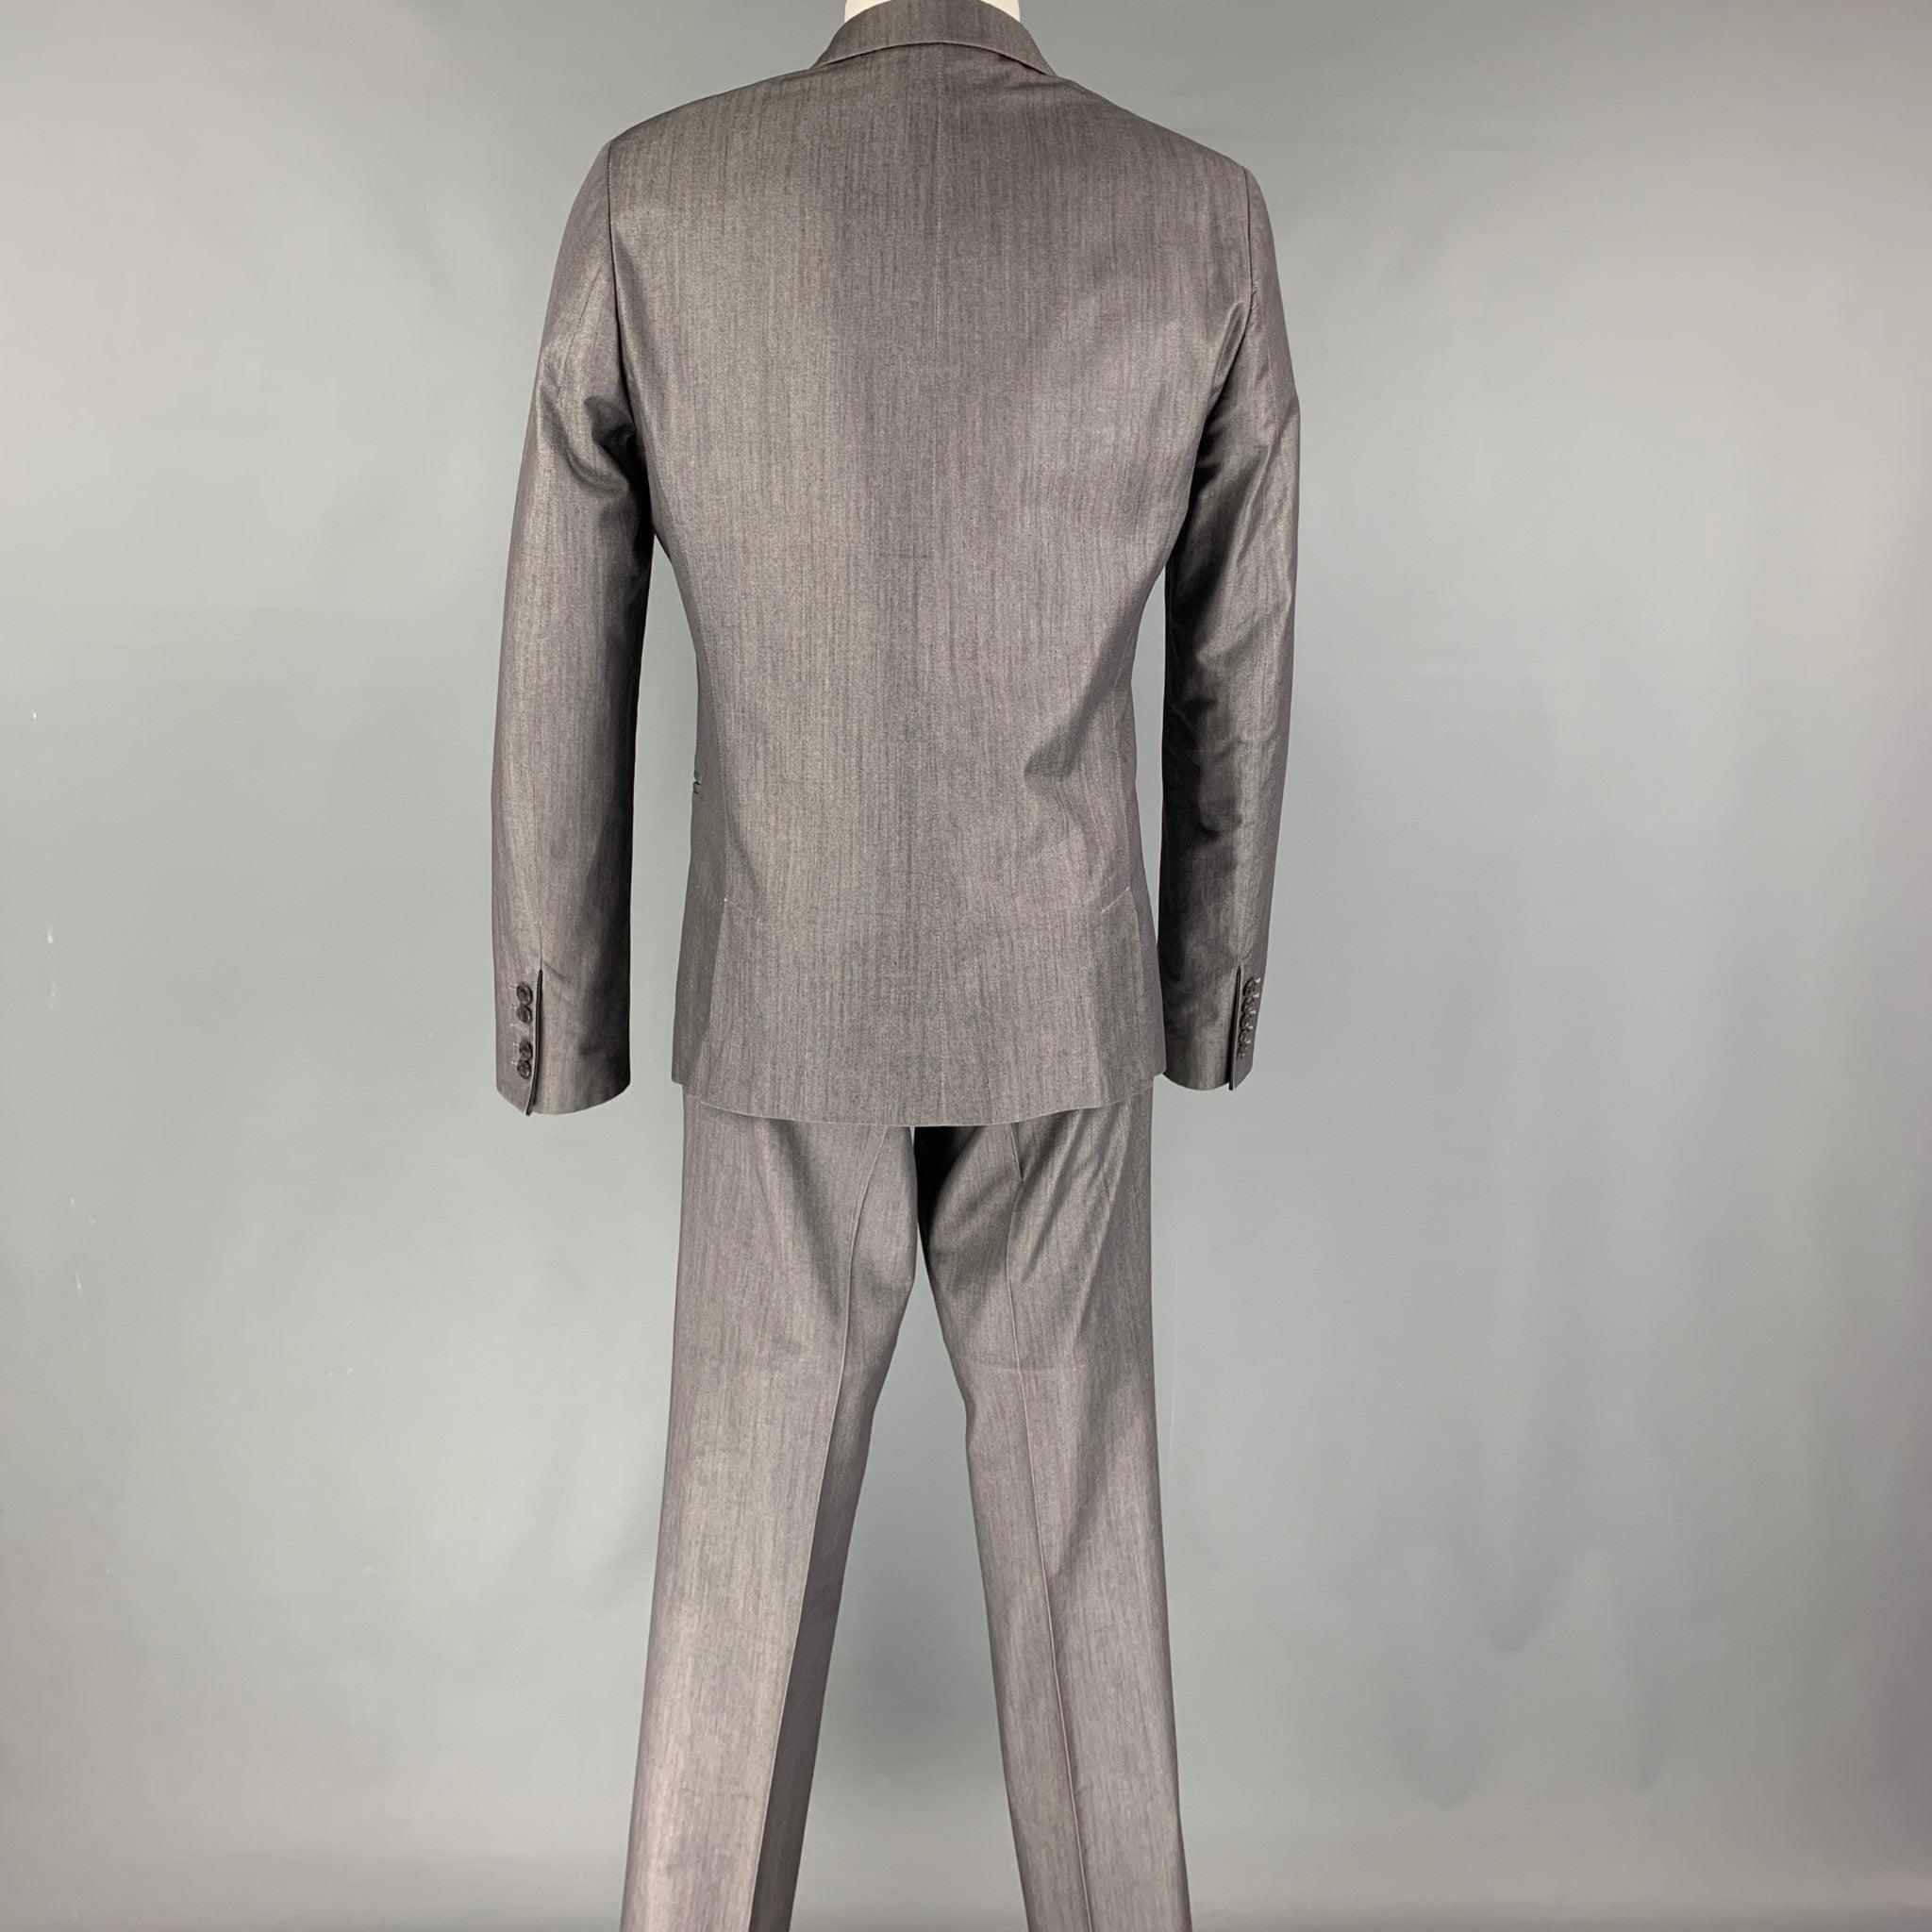 PHILIPP PLEIN Size 38 Light Gray Cotton Blend Single Button Suit In Excellent Condition For Sale In San Francisco, CA